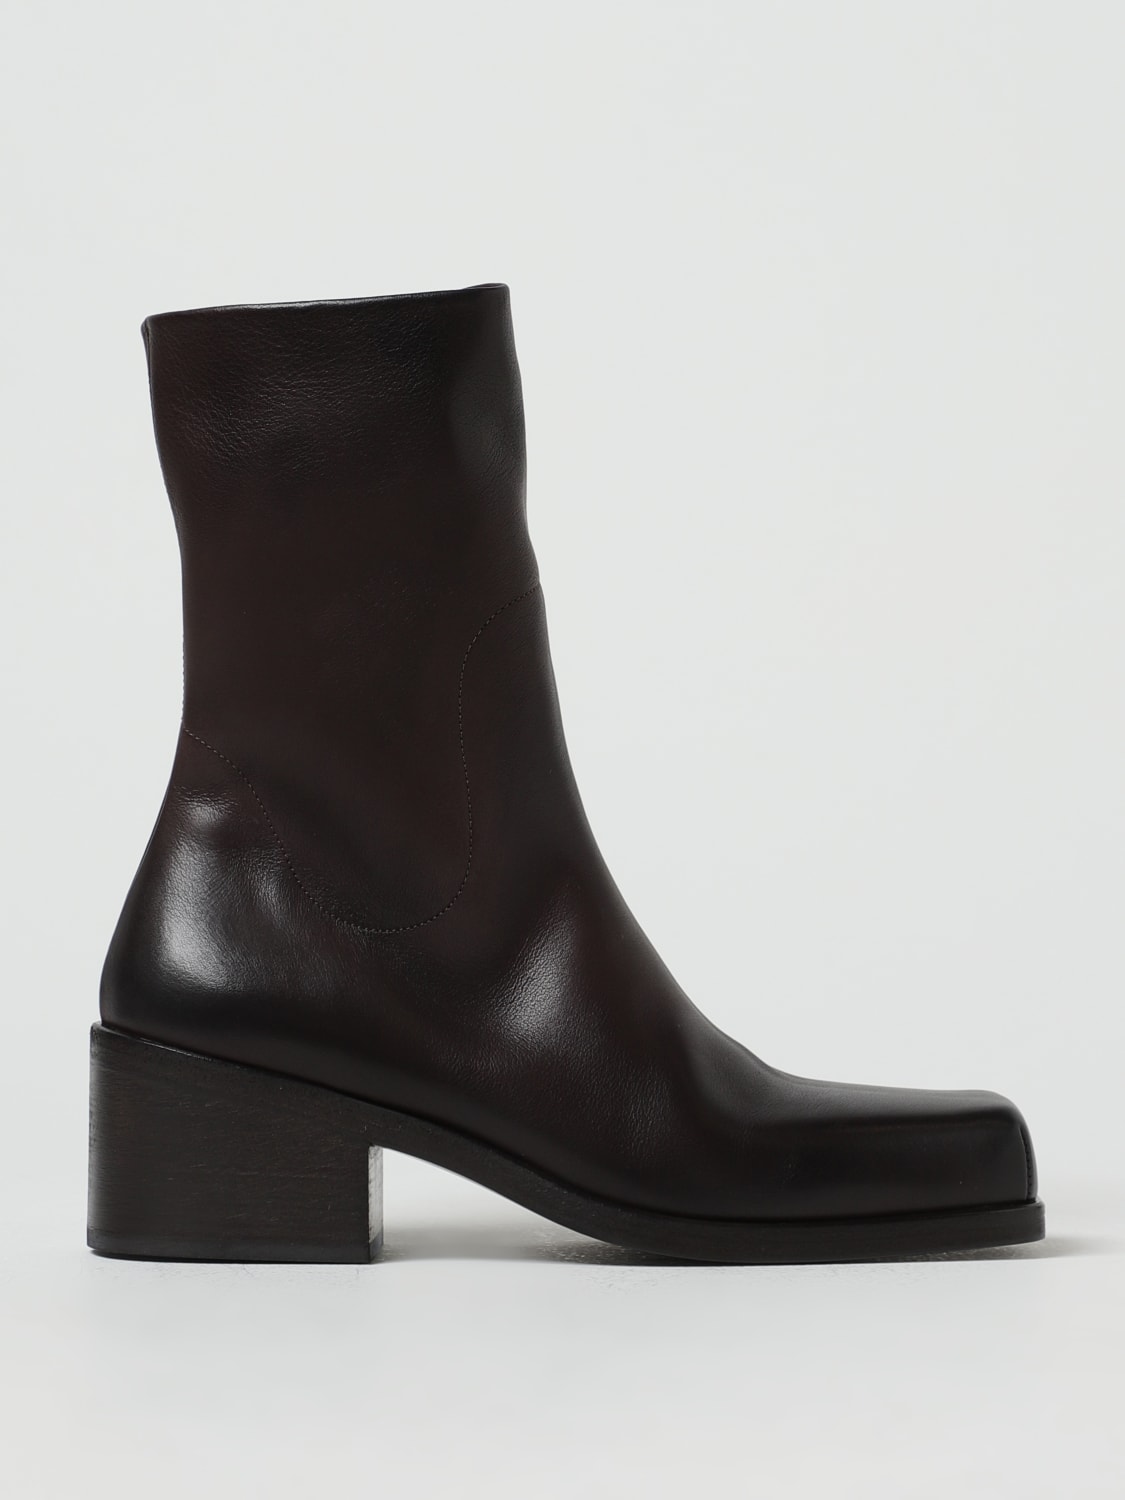 Marsèll - Marsell Cassello boots in tumbled leather with zip